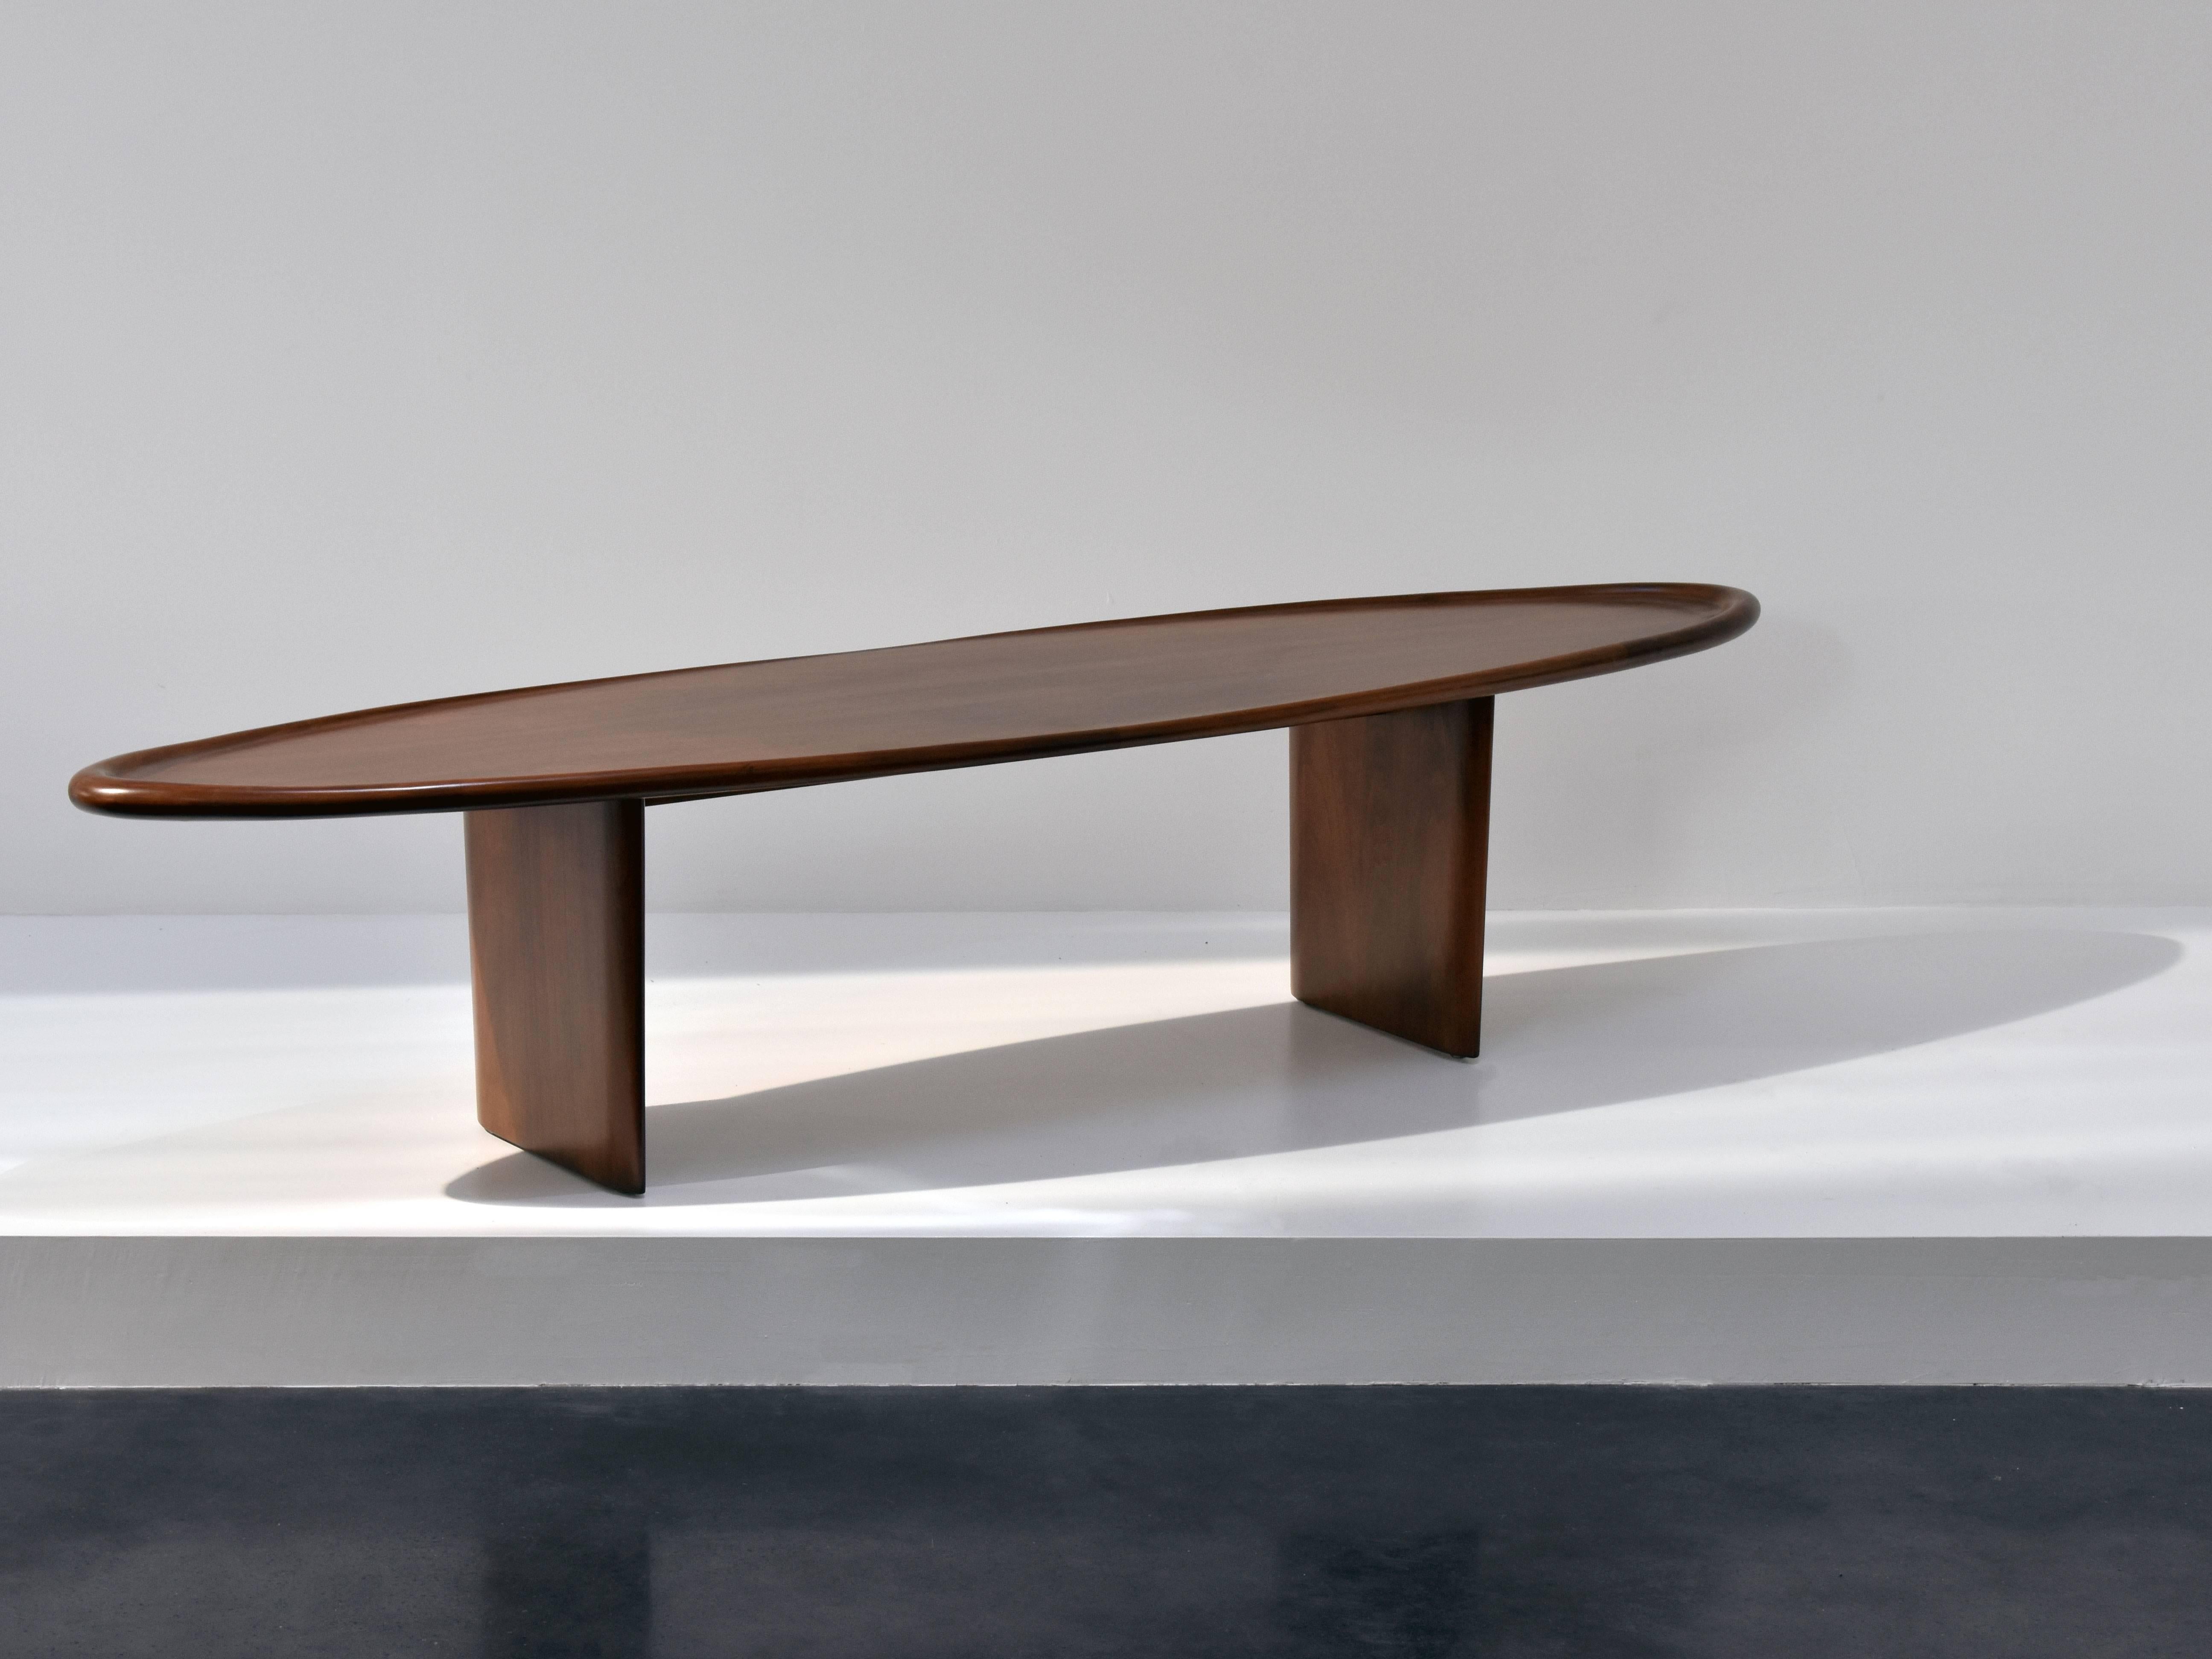 A walnut coffee table by T.H. Robsjohn-Gibbings in a symmetrical rounded form. Manufactured by American Widdicomb Furniture Company.